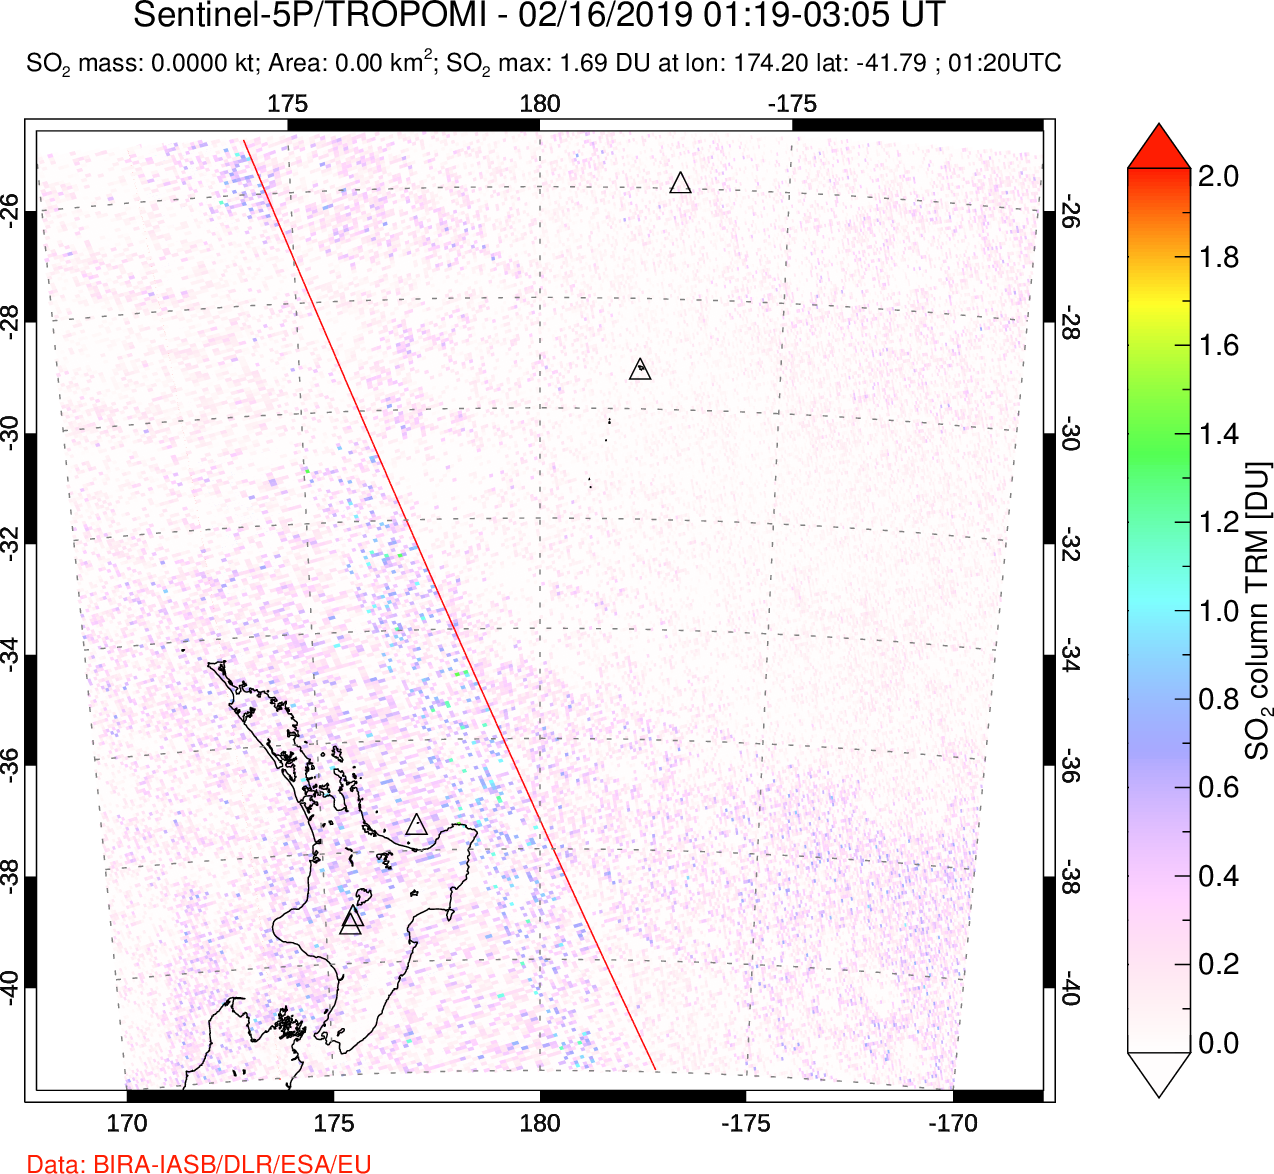 A sulfur dioxide image over New Zealand on Feb 16, 2019.